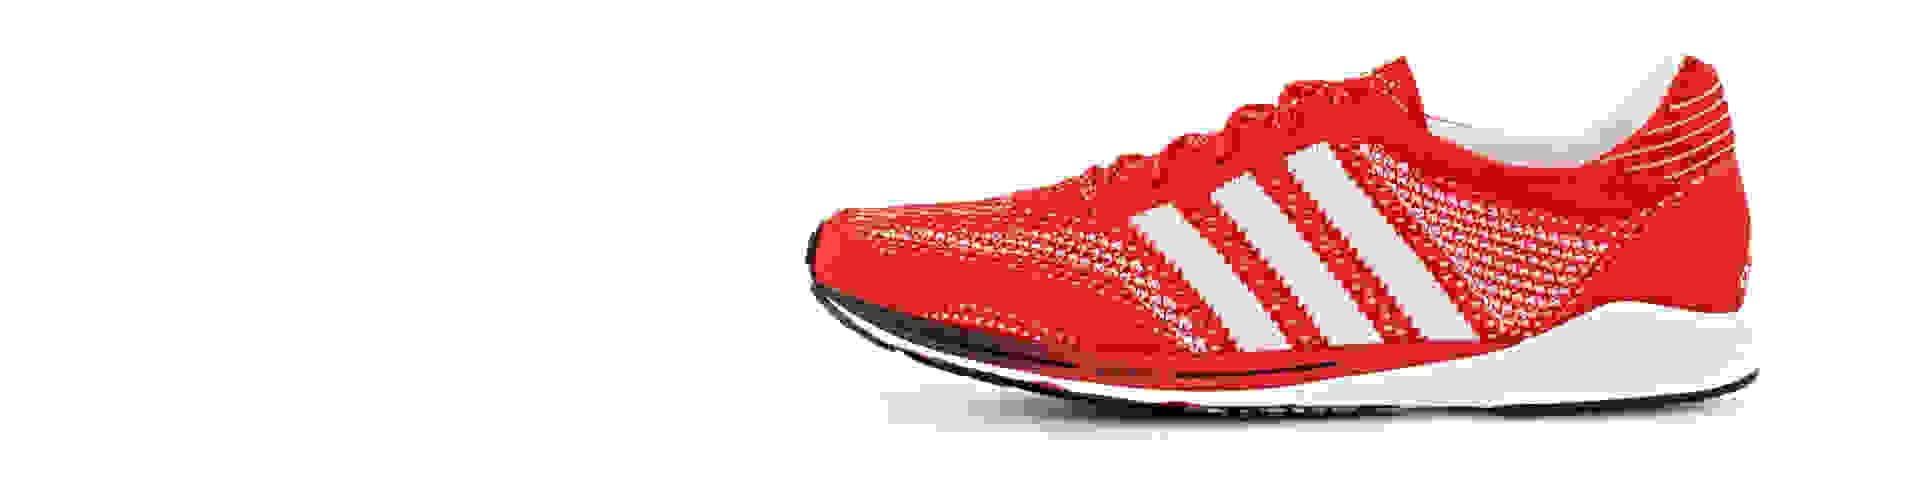 A red adidas olympics running shoe